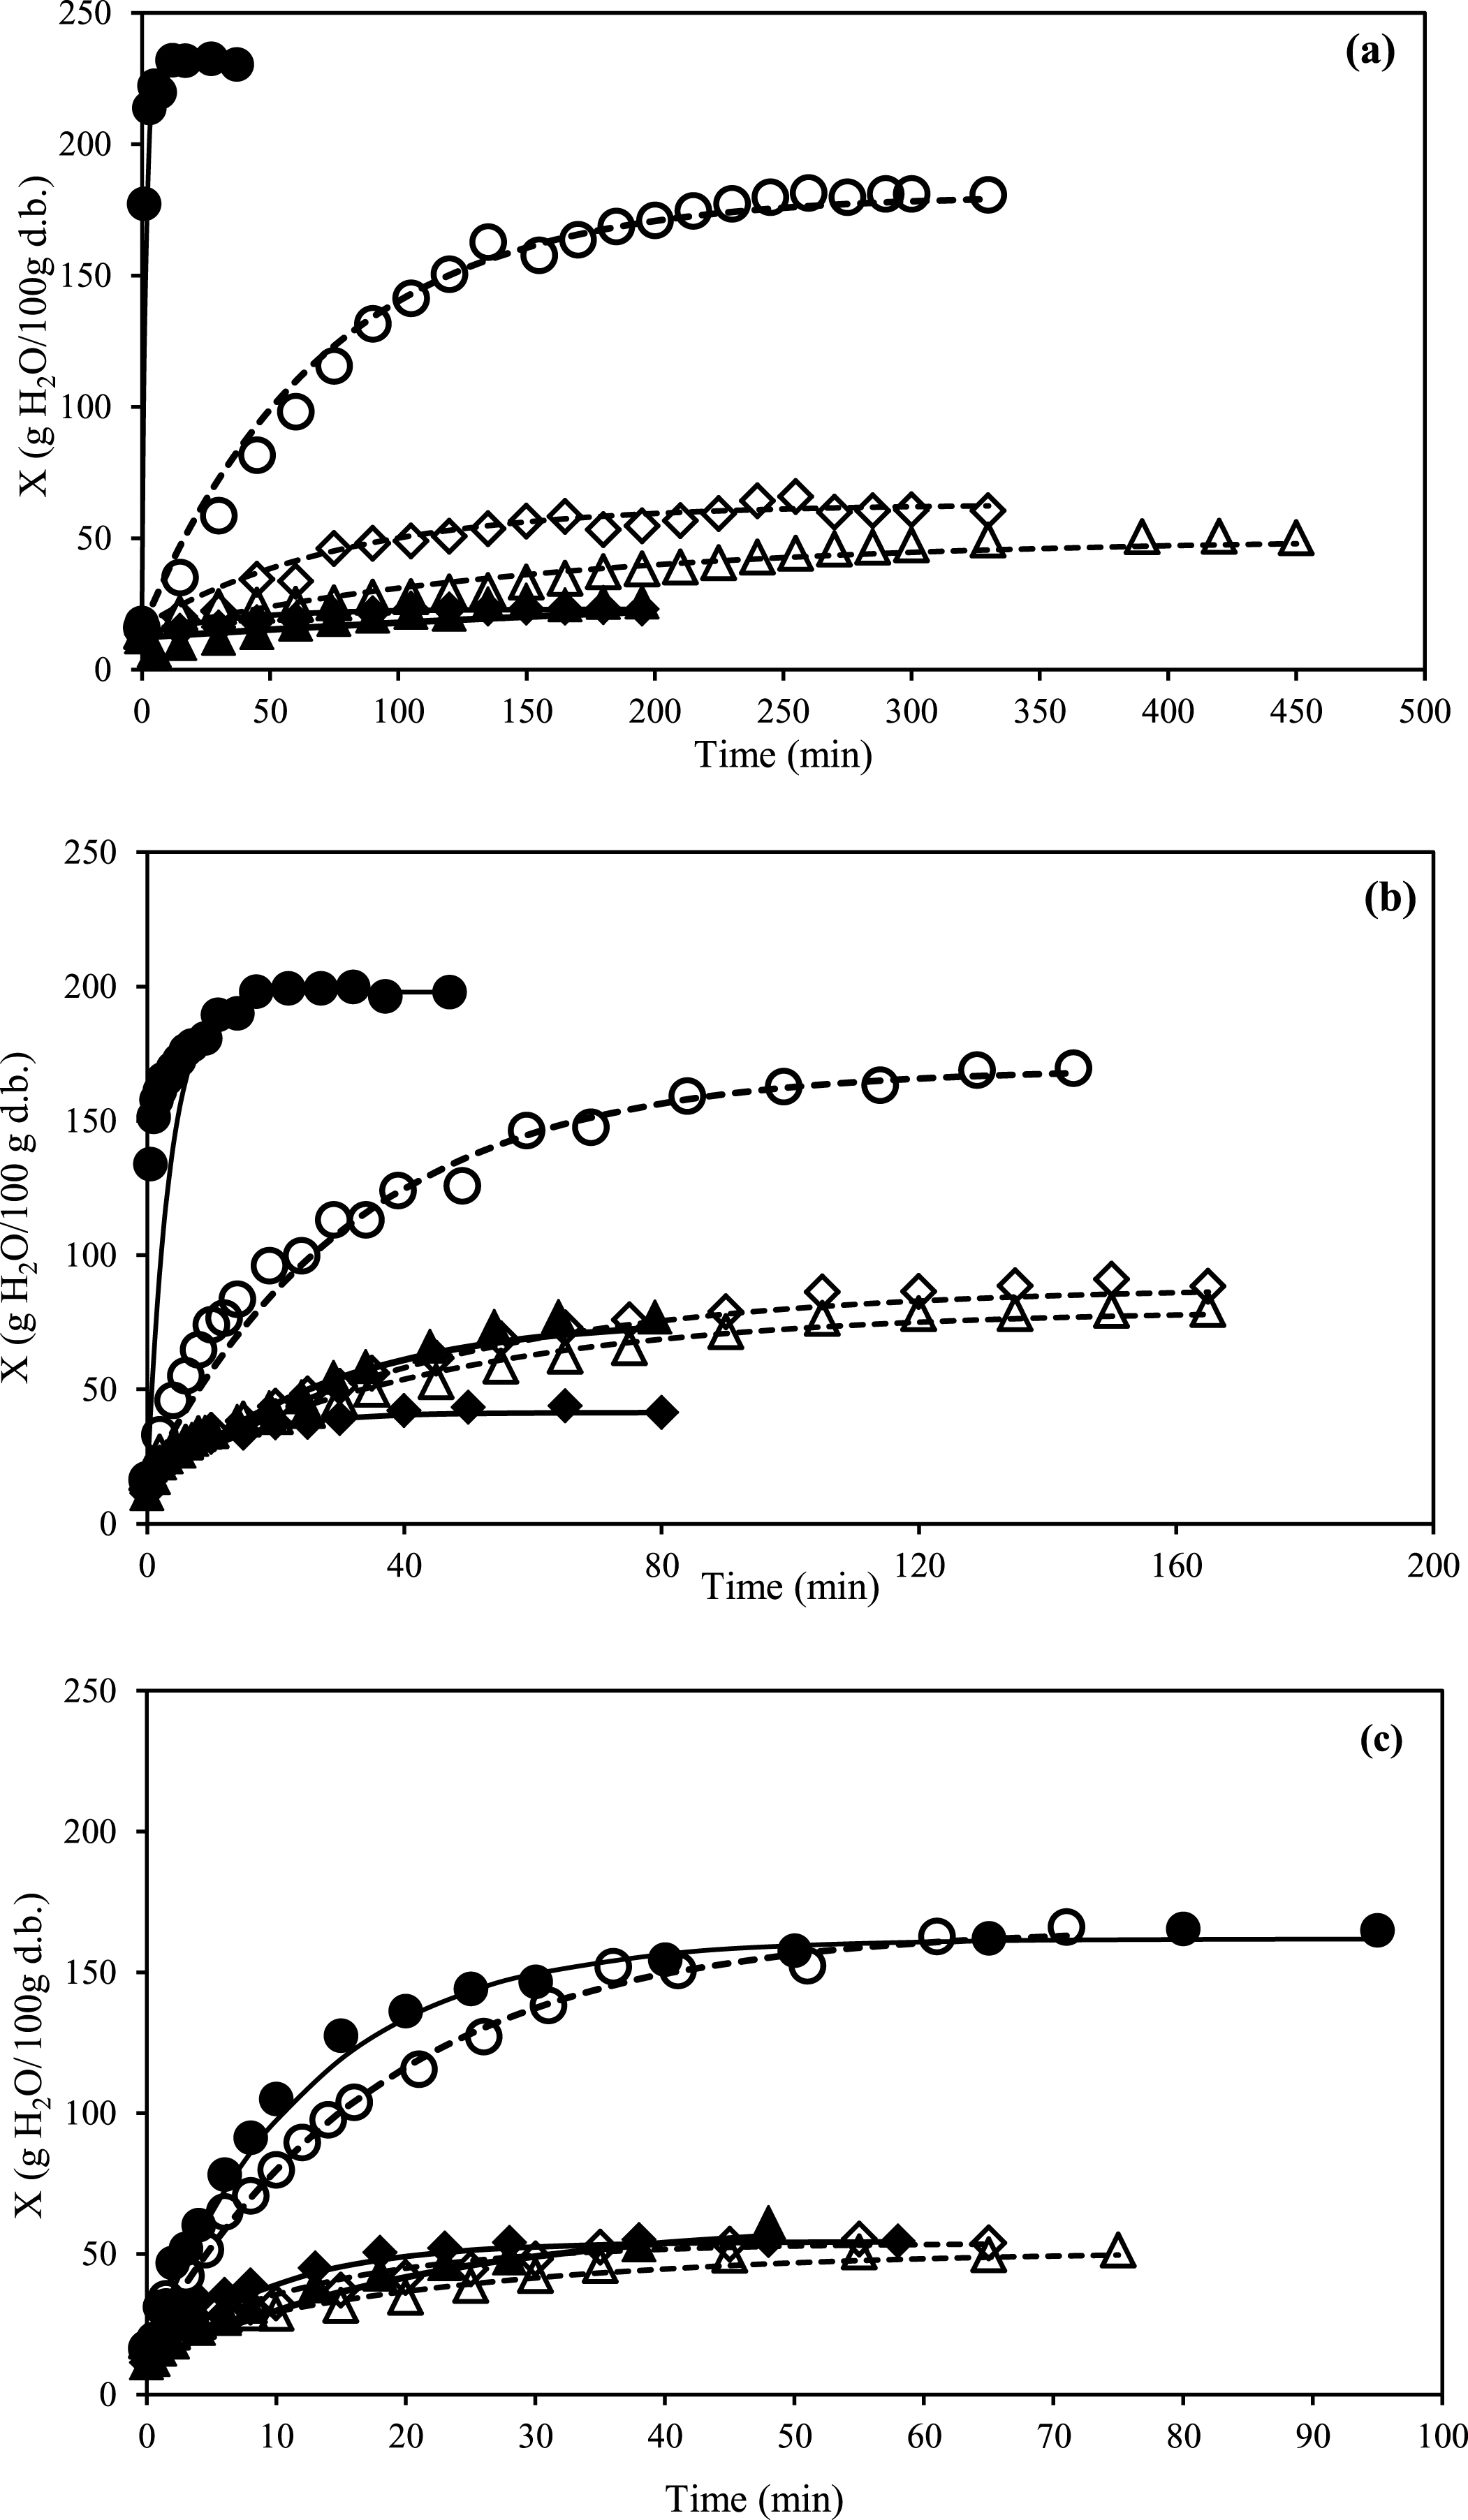 Comparison of experimental and predicted rehydration curves of raspberries: experimental data (symbols) and prediction given by Weibull’s model (lines): (a) 25°C, (b) 40°C, (c) 60°C. Air-drying (empty symbols and dotted lines) and freeze-drying (filled symbols and continuous lines). C (circles), WI-BAC (triangles), DI-BAC (diamonds).